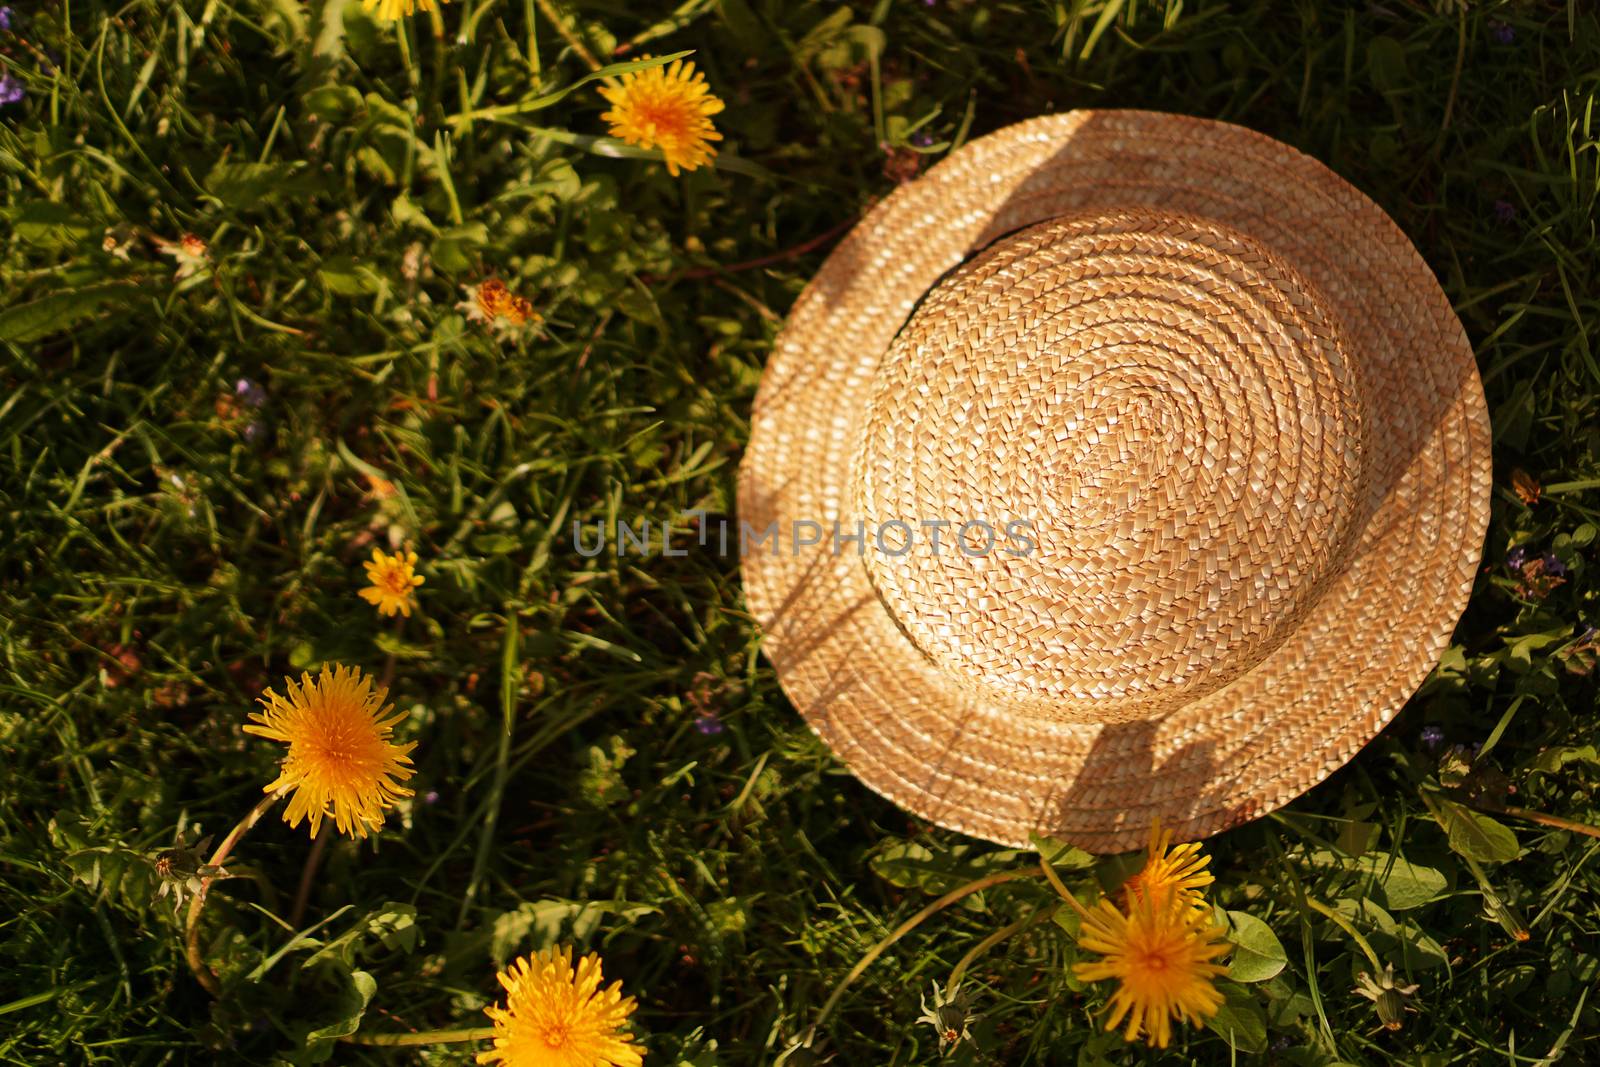 Spring Landscape with dandelions. Yellow flowering meadow. Nature background. Garden with straw hat. Flowers.